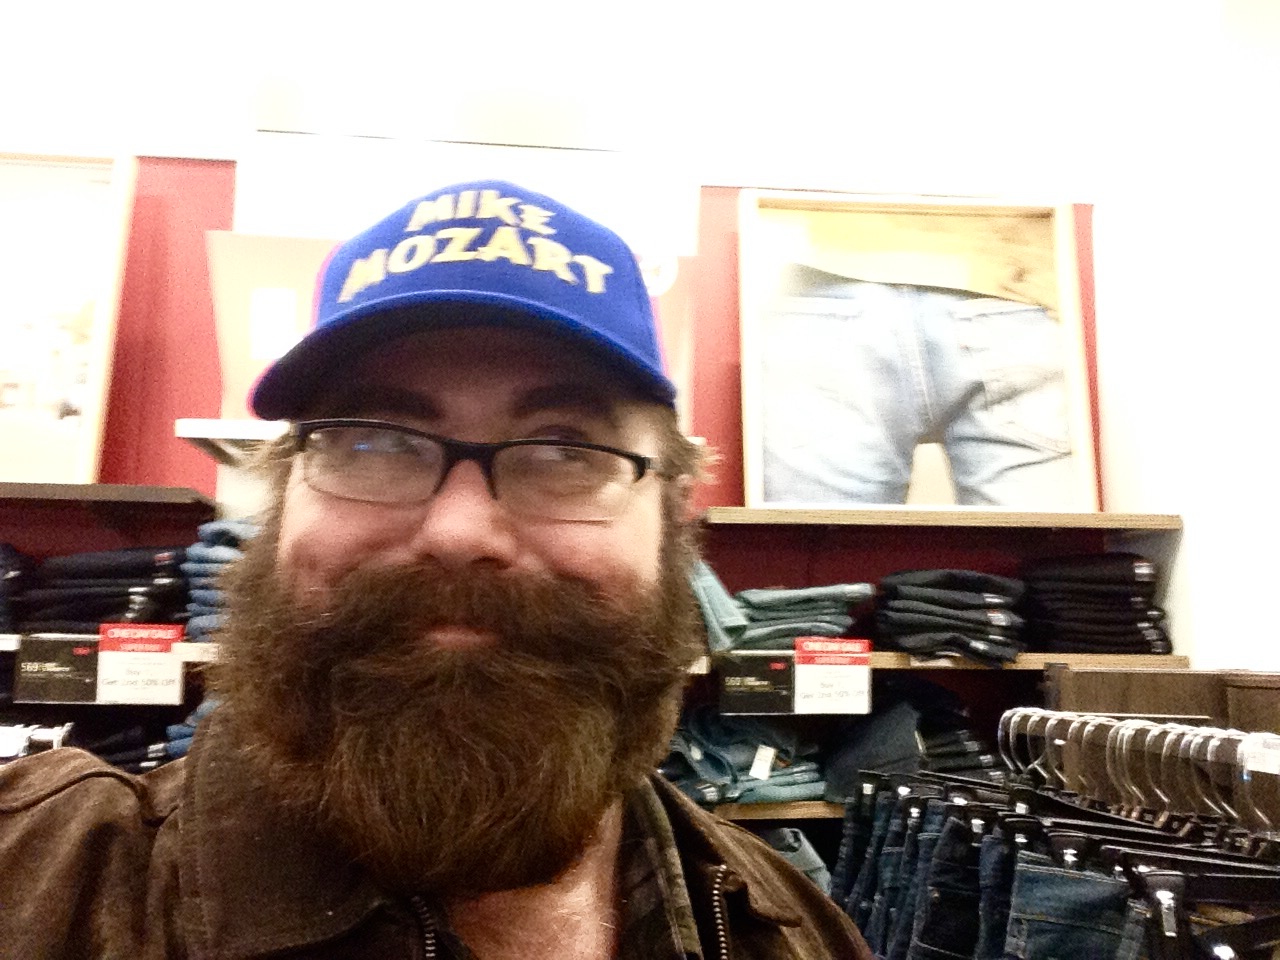 a man wearing a blue hat, glasses and jacket in a clothing store